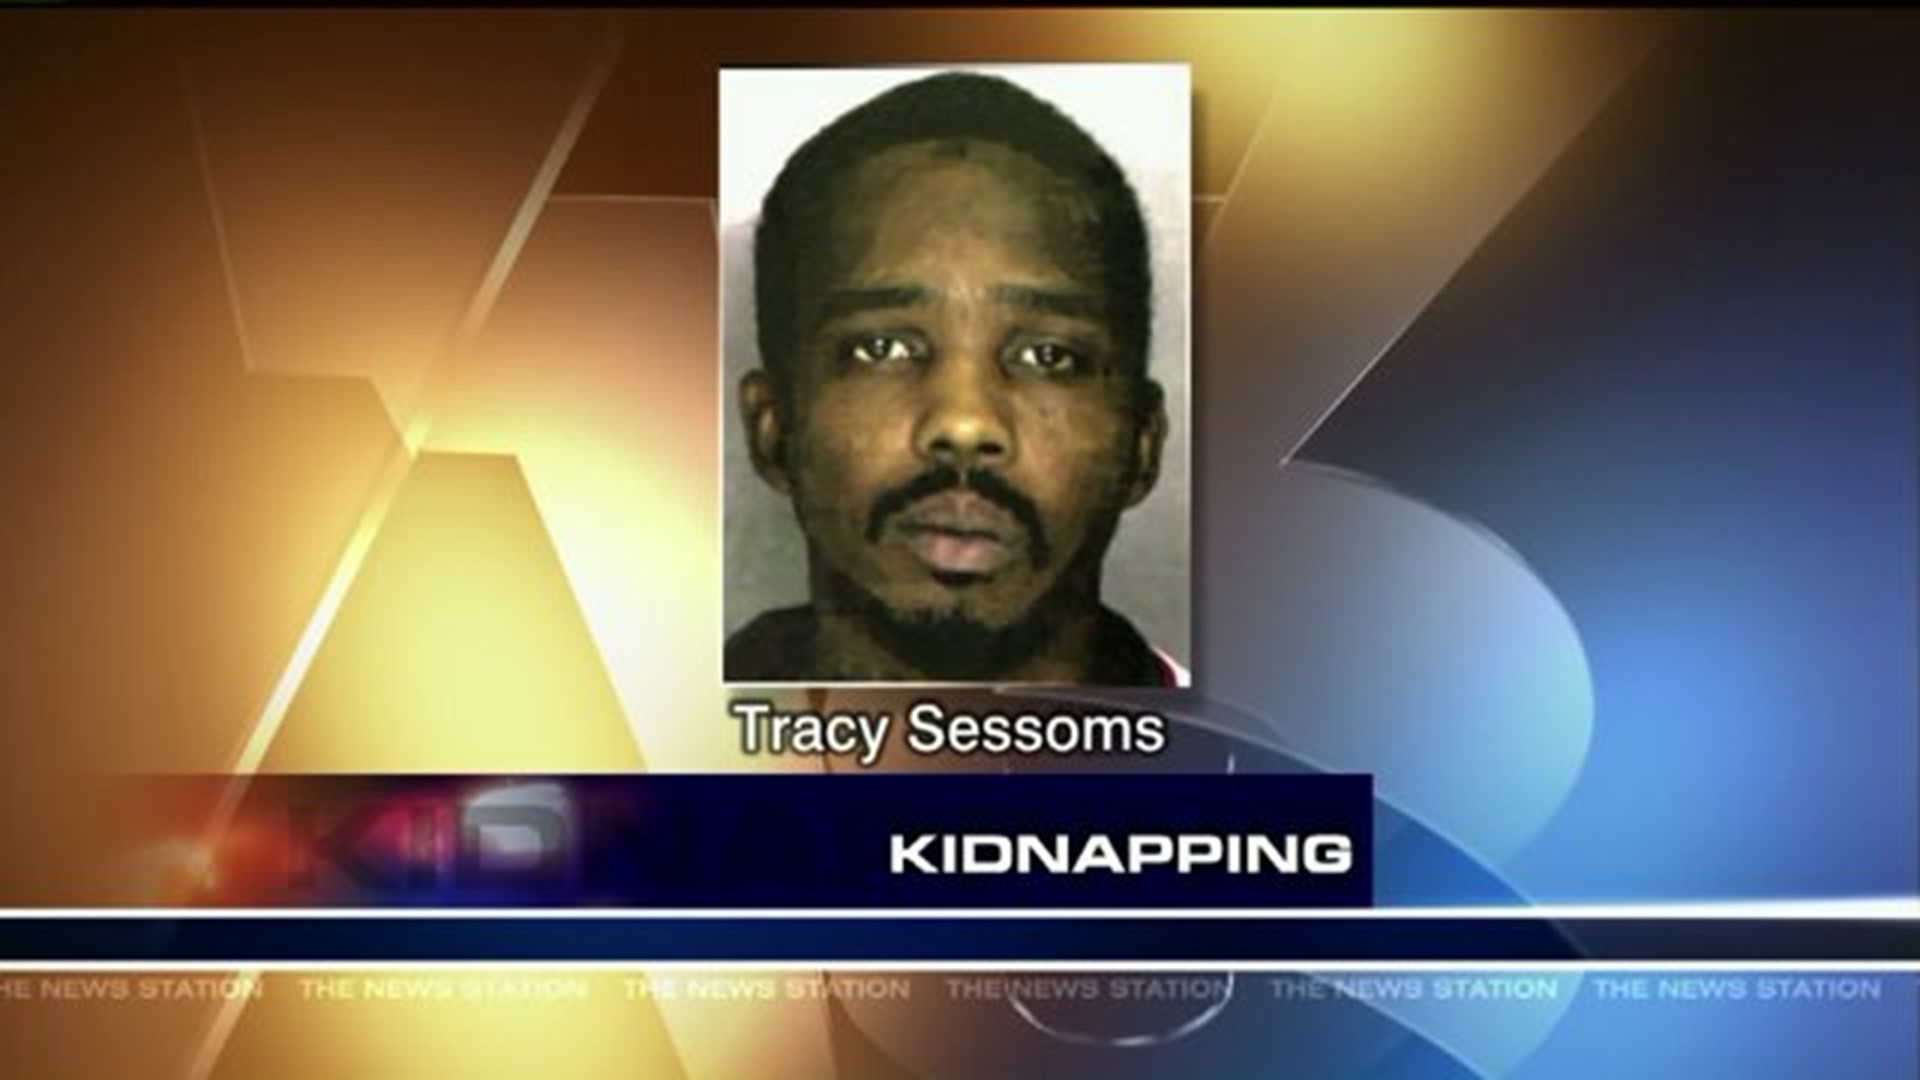 Man Wanted for Kidnapping and Threatening Ex with Scissors in Custody